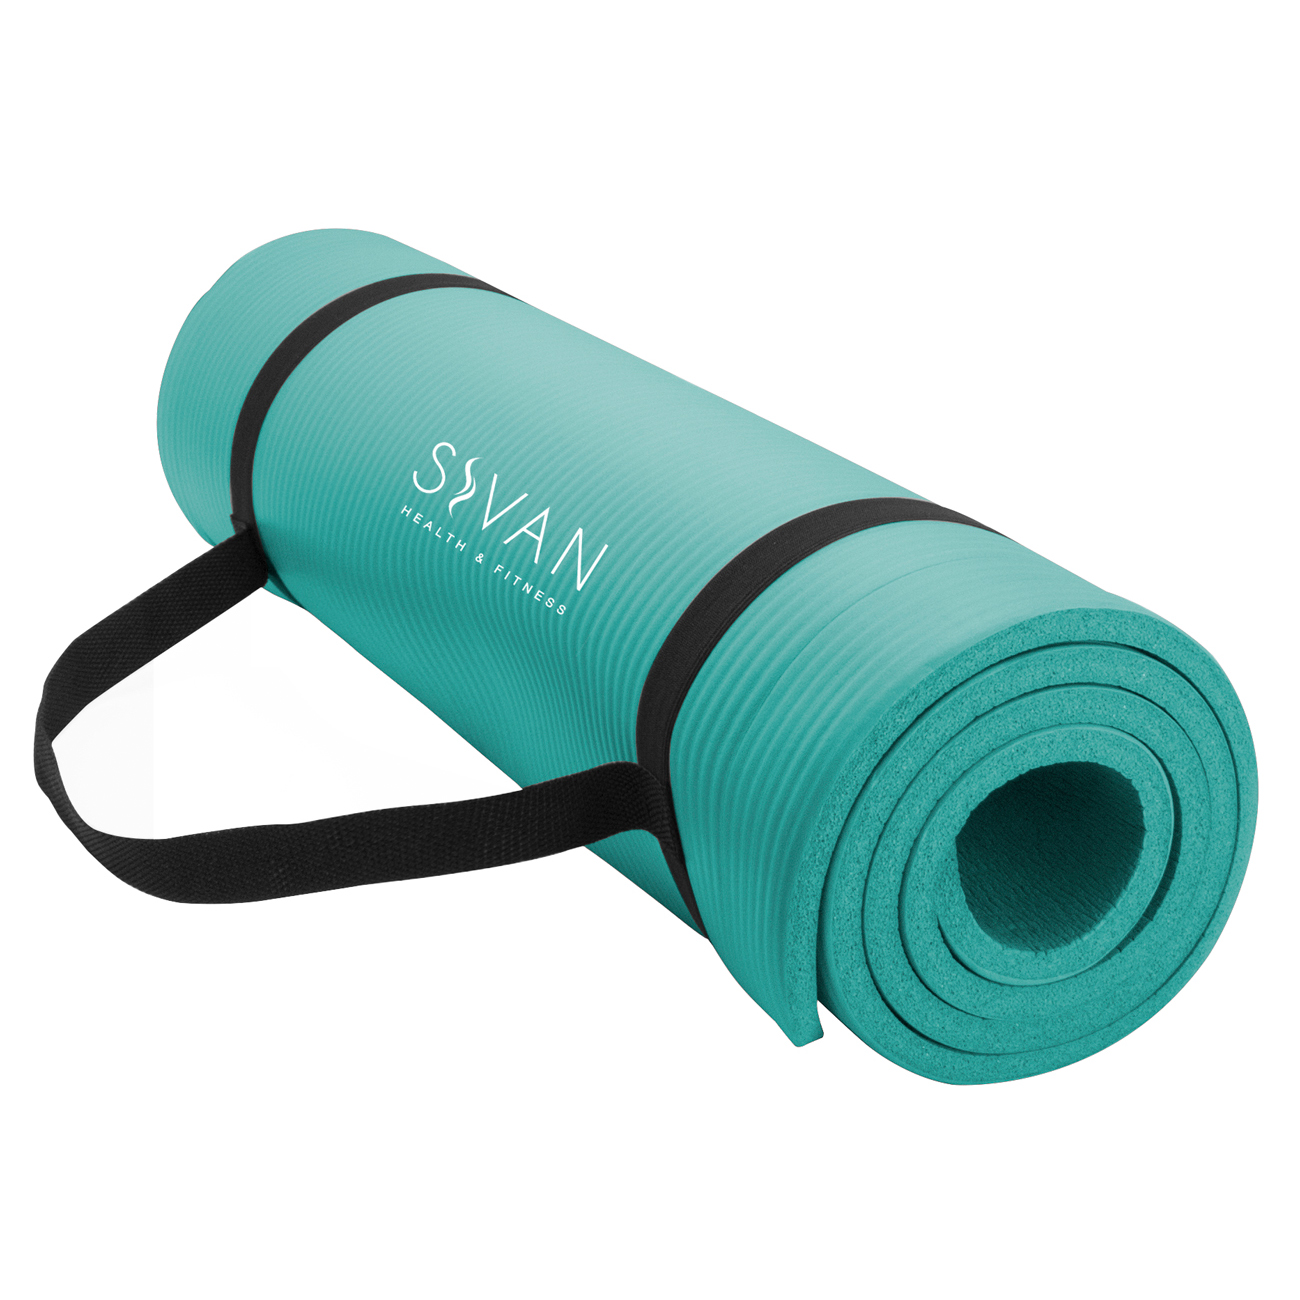 Sivan Health and Fitness 1 or 2 In. Extra Thick 71 In. Long NBR Comfort Foam Yoga Mat for Exercise, Yoga and Pilates Teal - image 1 of 8